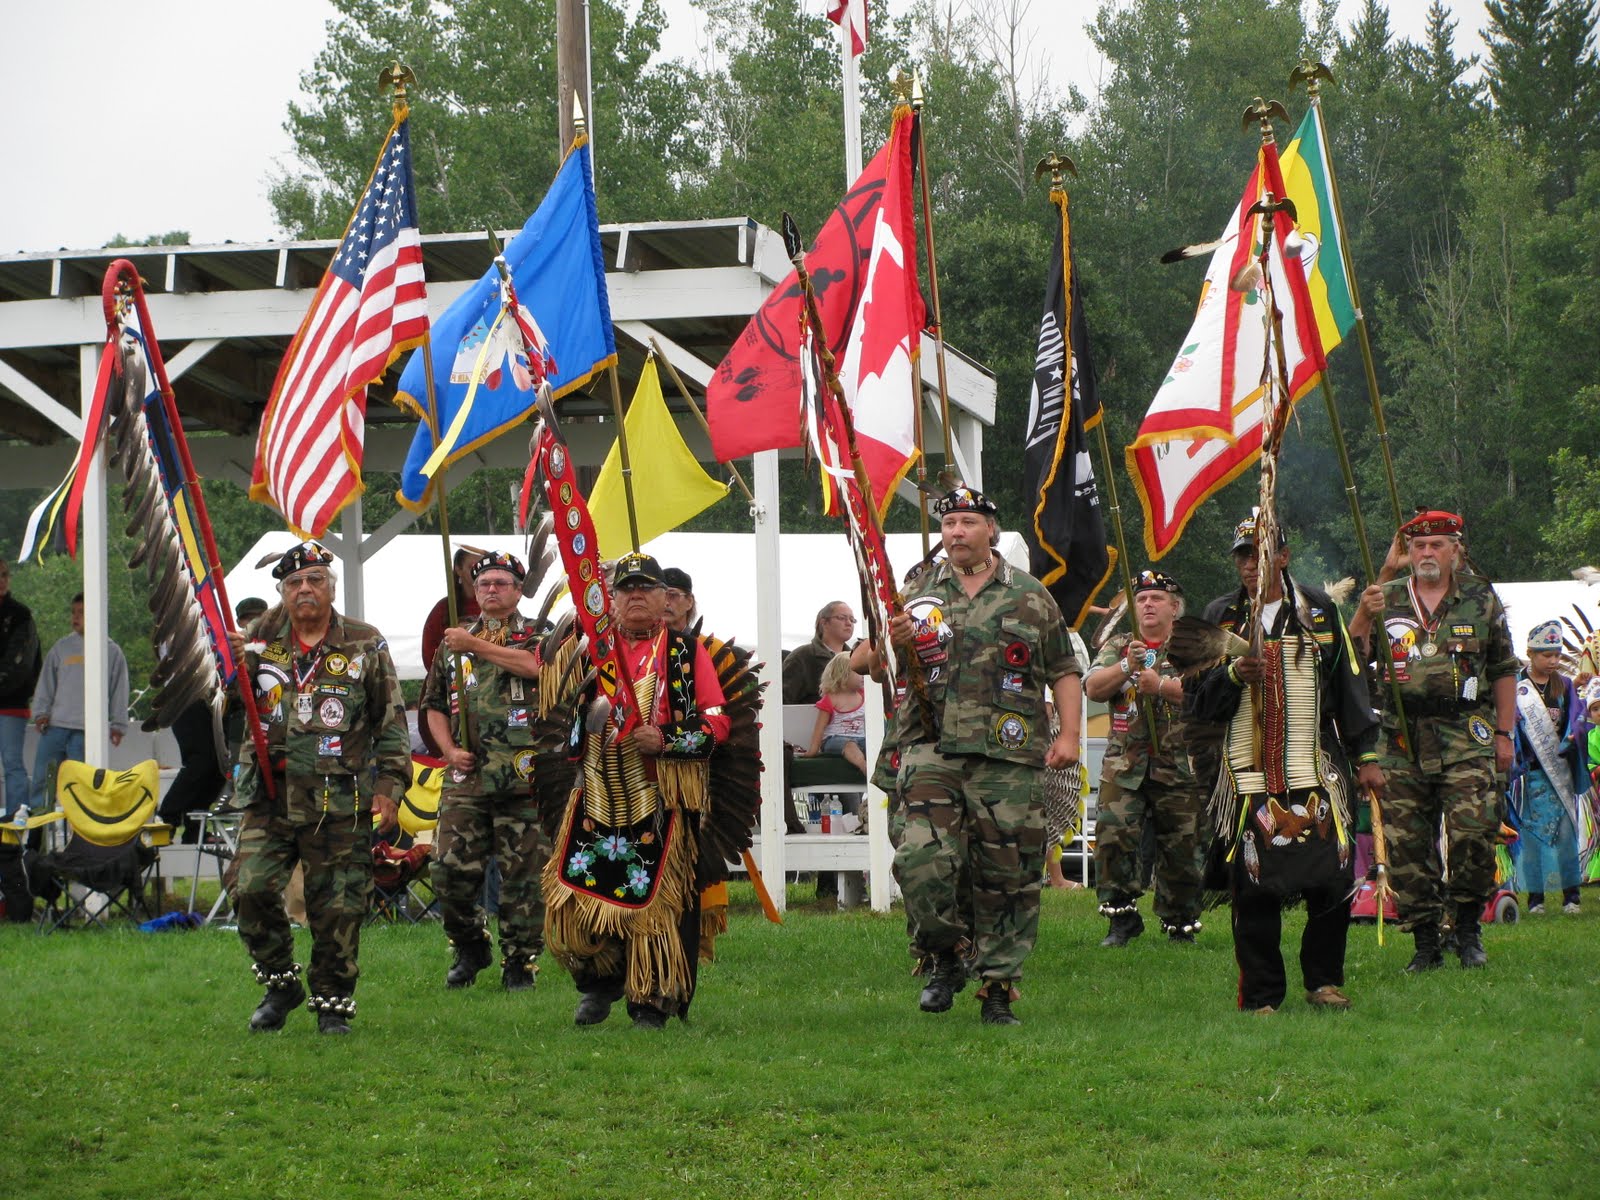 [Eagle+Staffs+and+Flags.JPG]